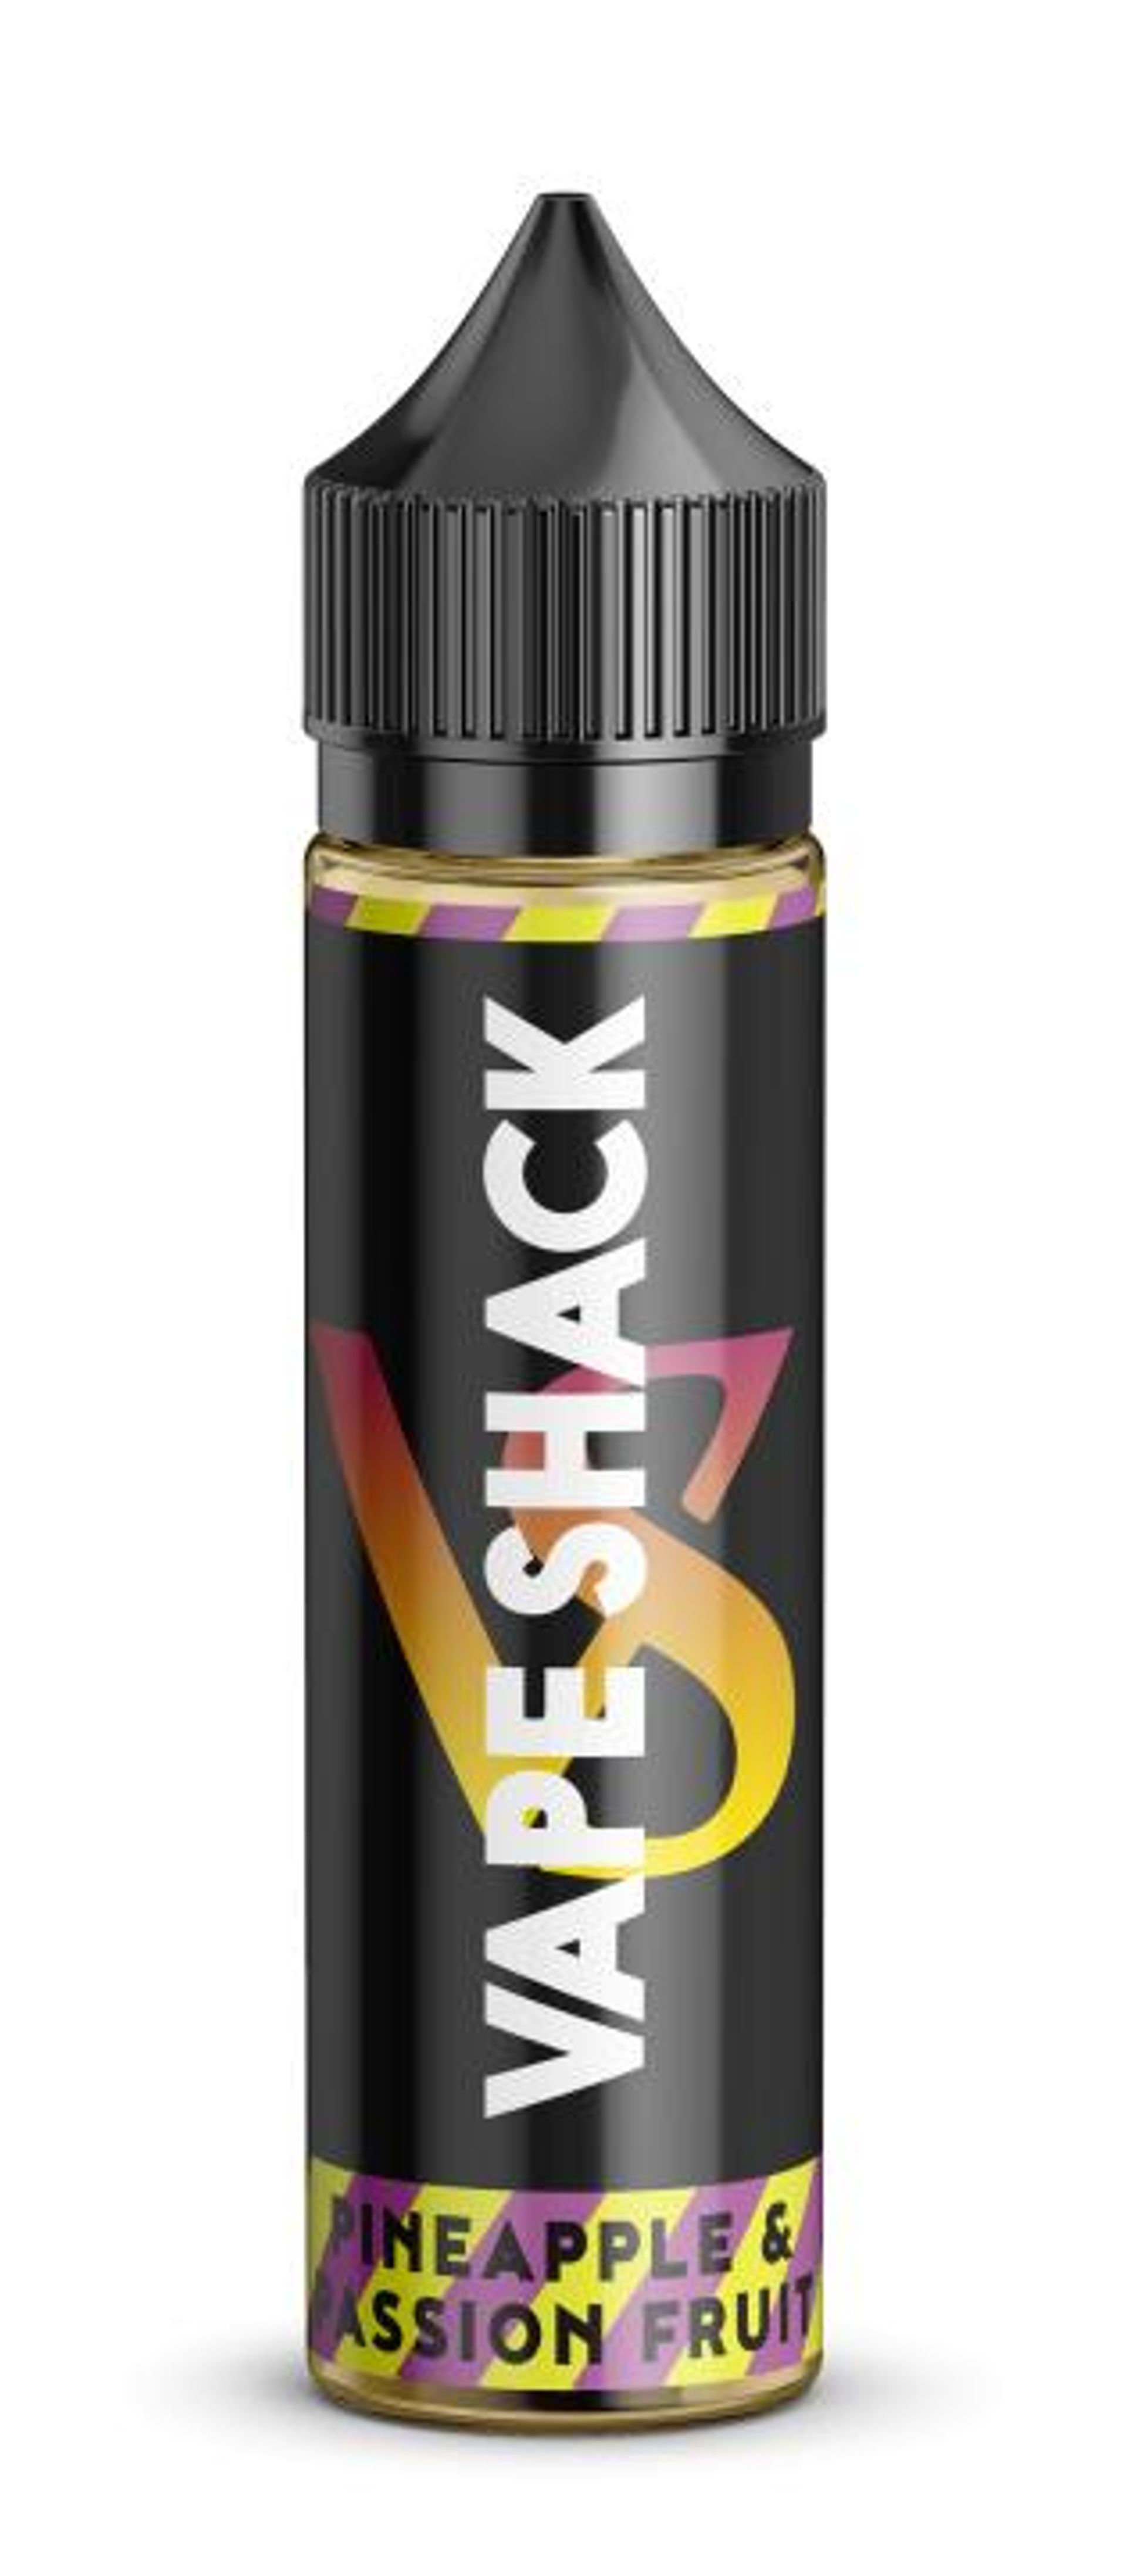 Image of Pineapple Passionfruit by Vape Shack